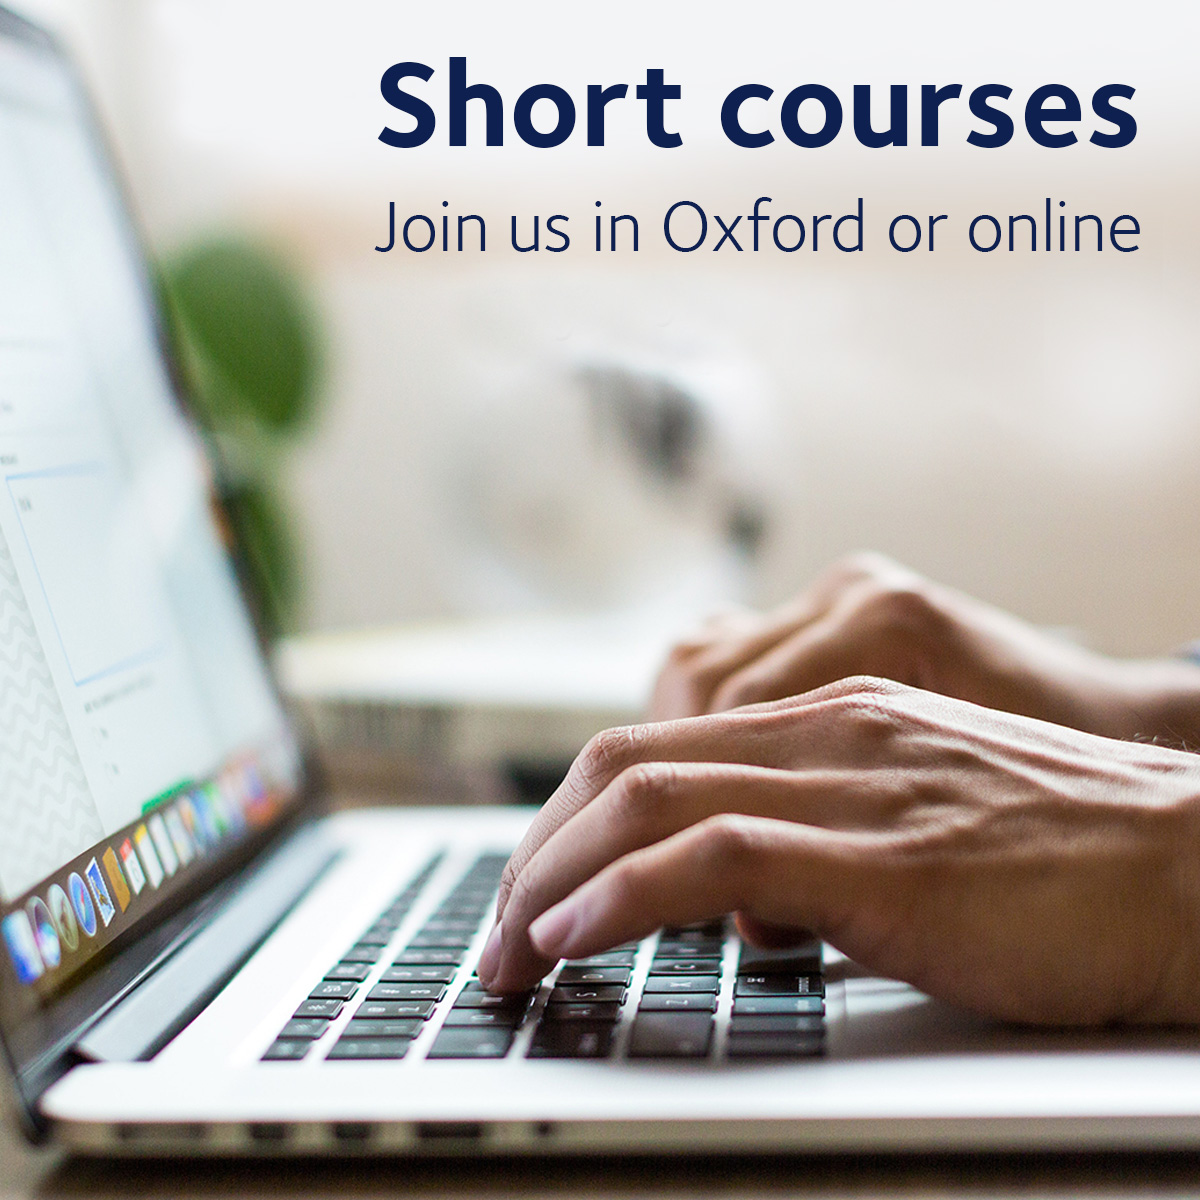 Join a short course in Oxford or online